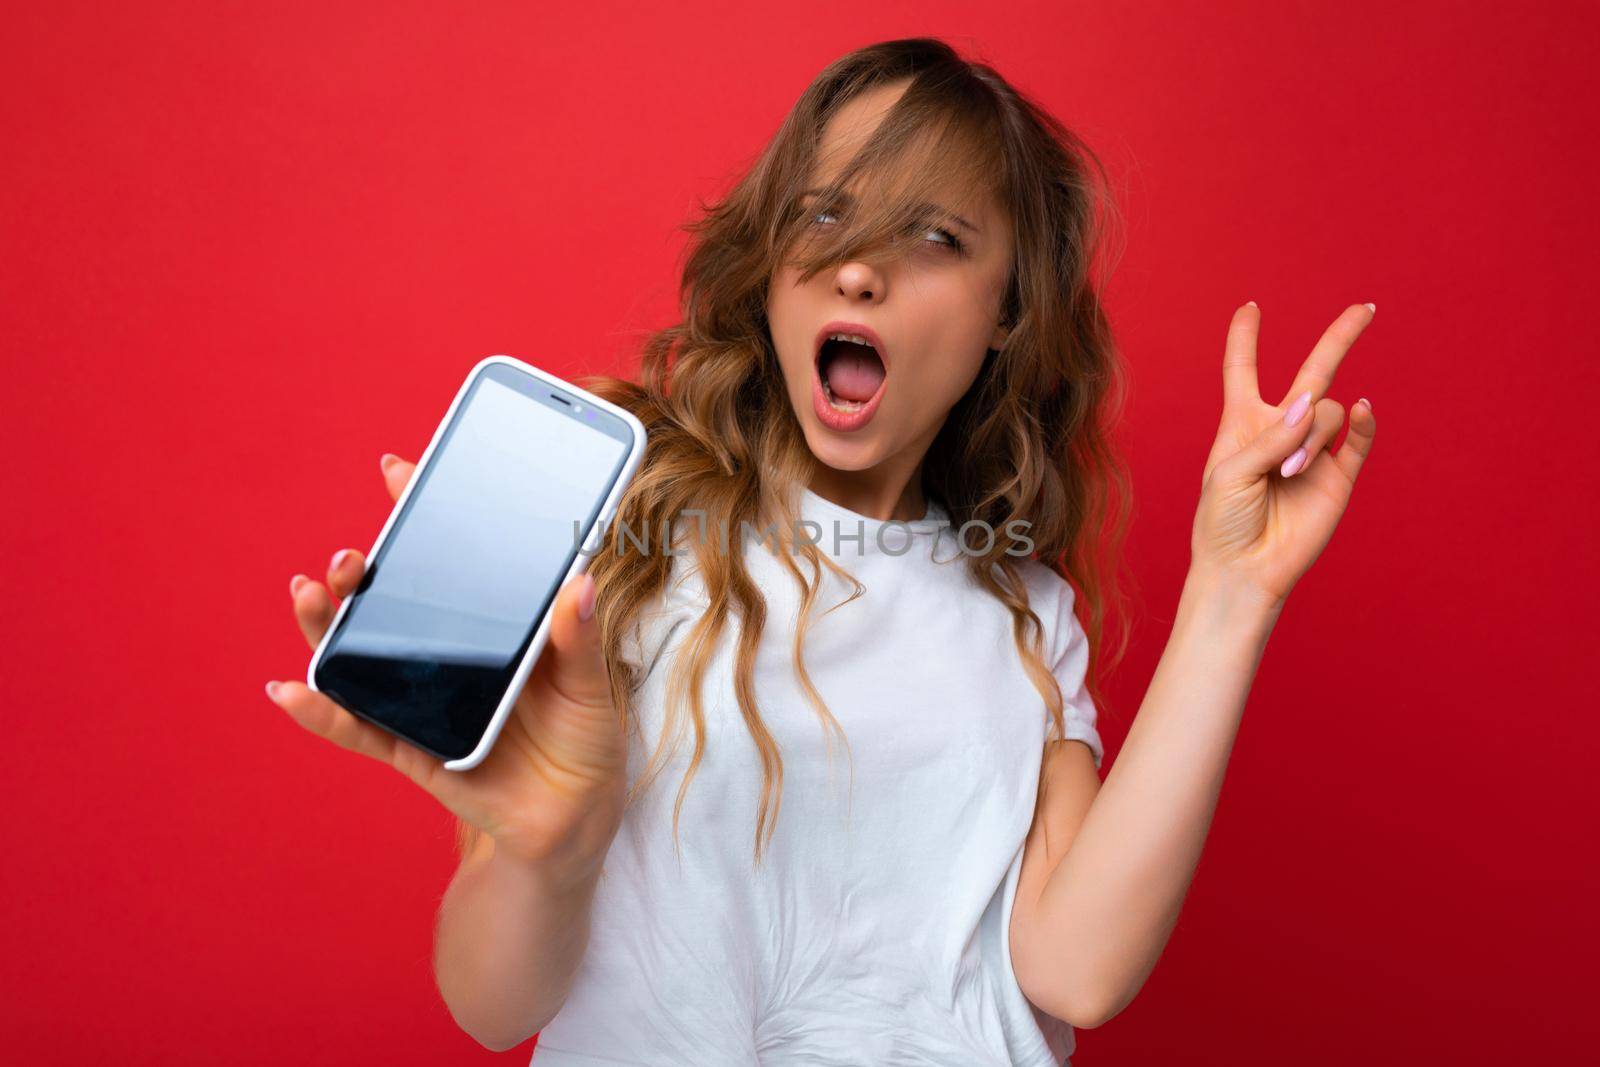 Photo of beautiful amazed astonished young blonde woman good looking wearing white t-shirt standing isolated on red background with copy space holding phone showing smartphone in hand with empty screen display for mockup looking at camera showing peace gesture.